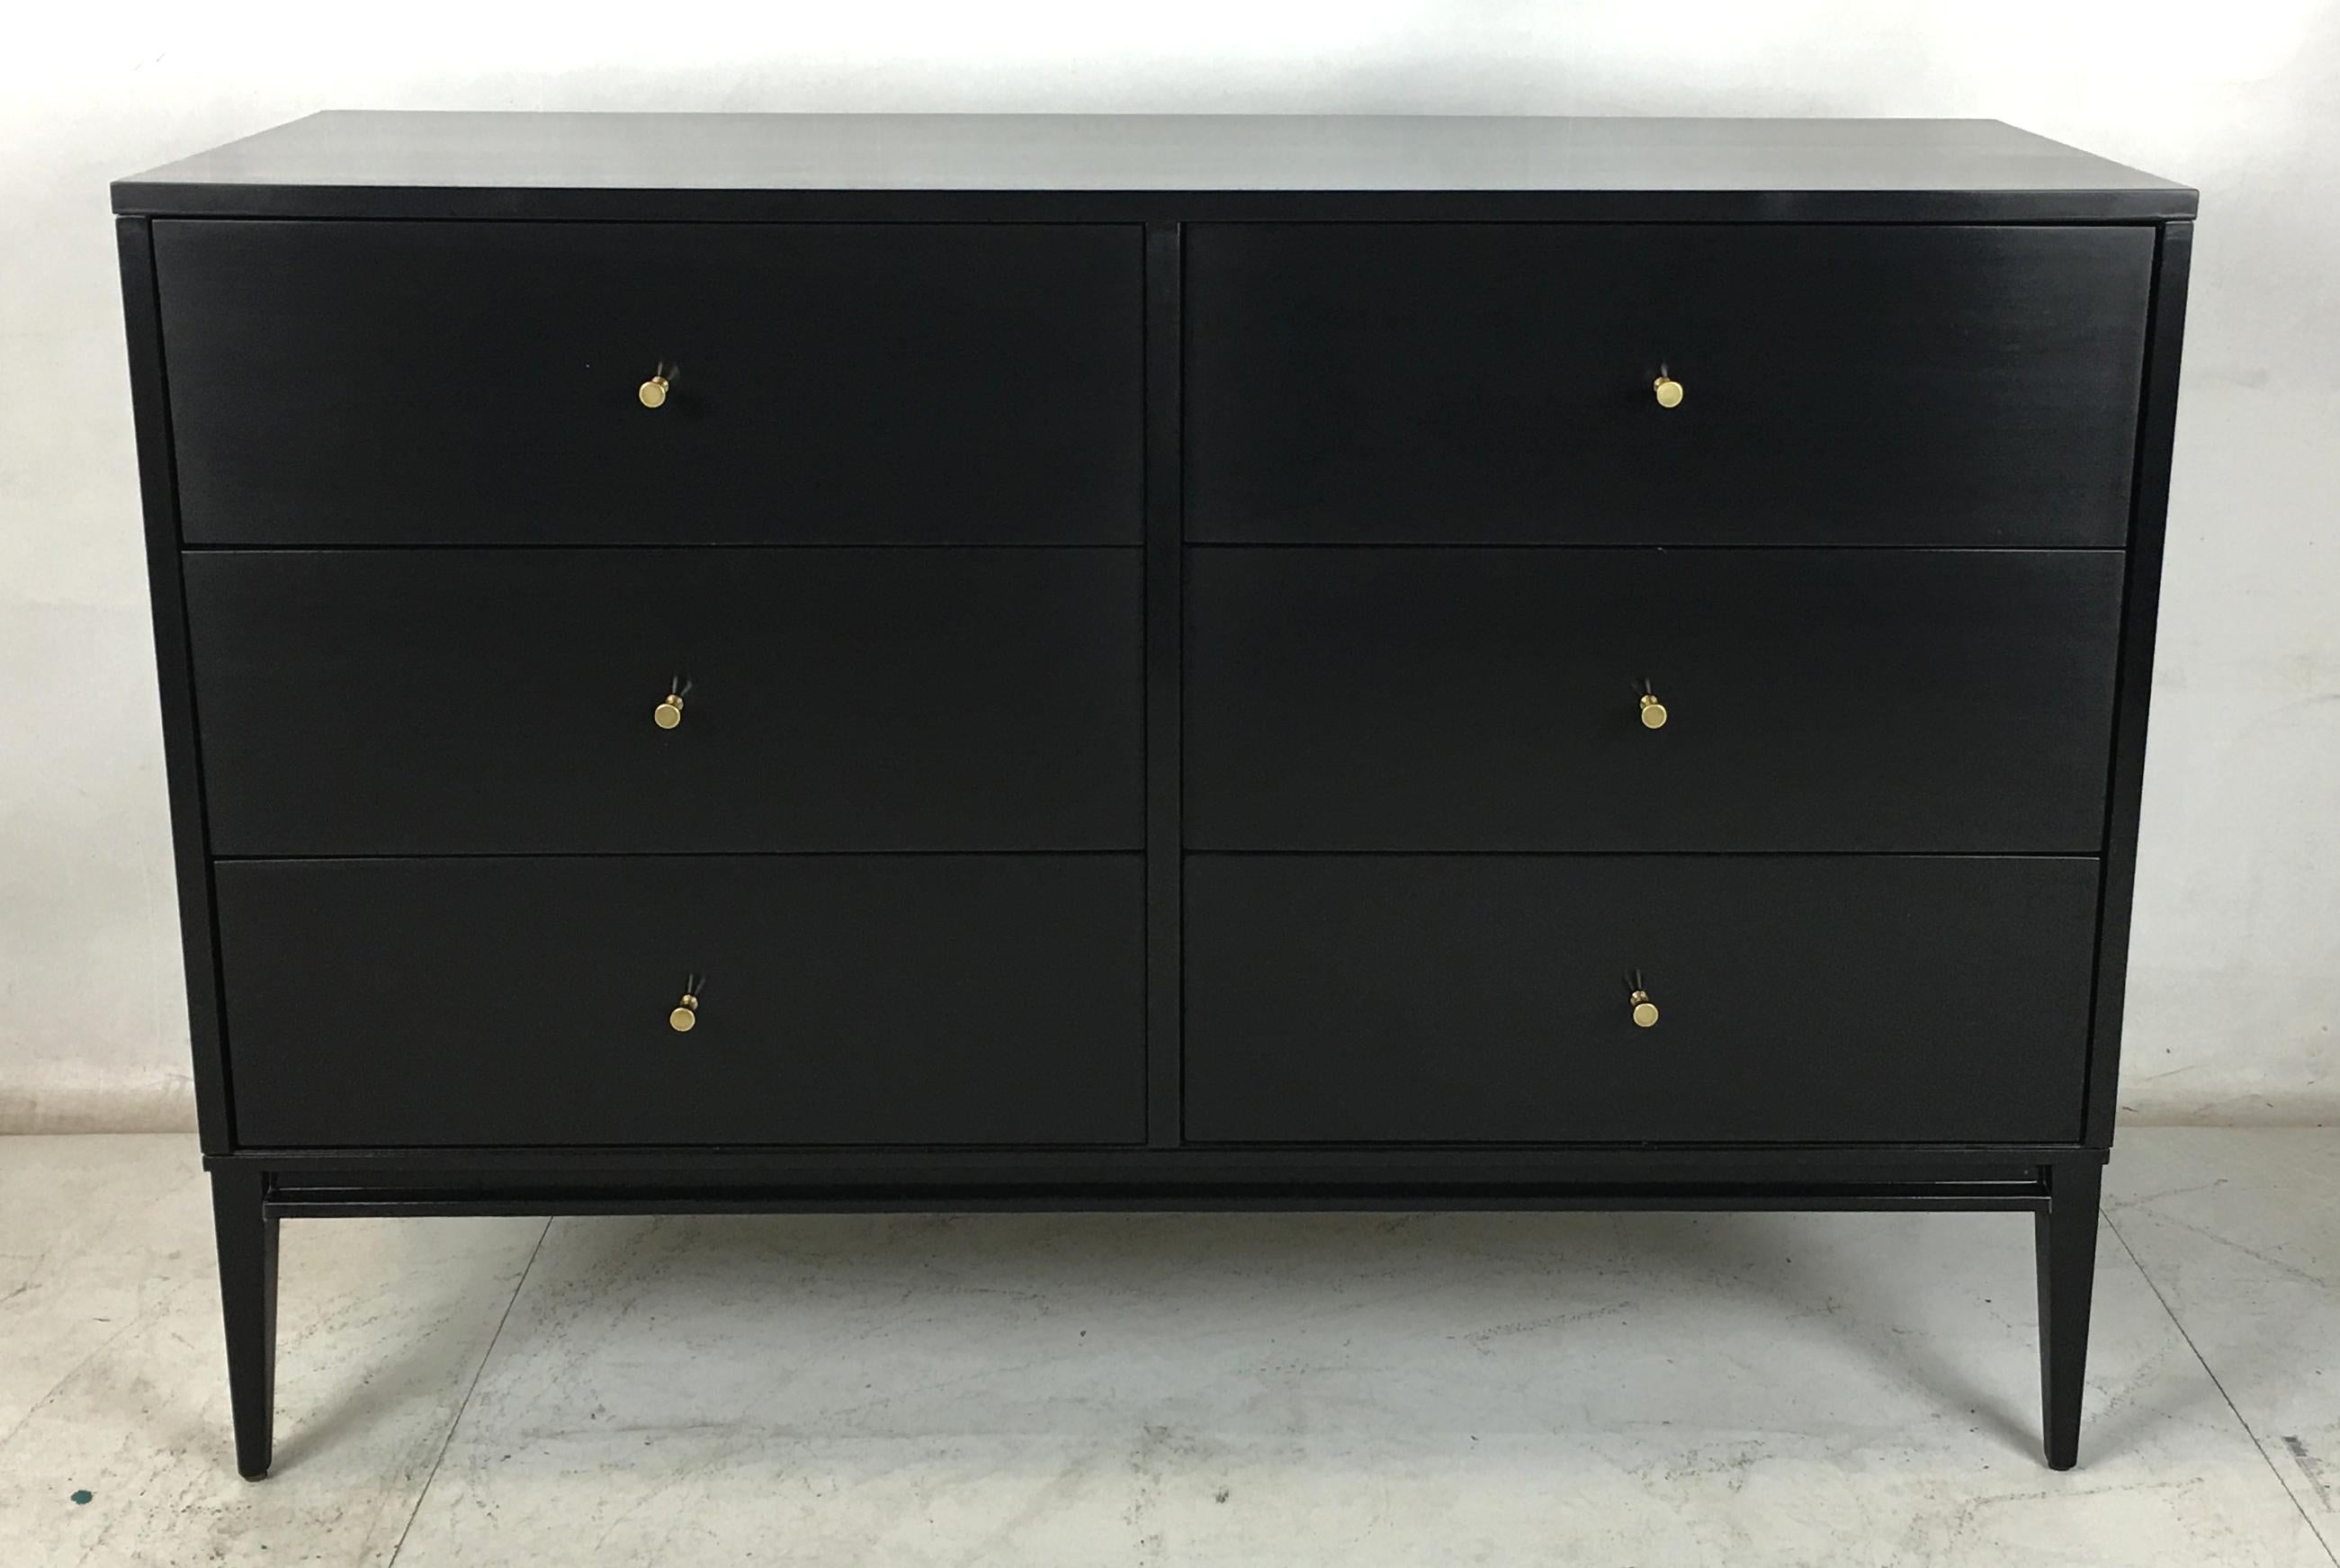 Painstakingly restored six-drawer dresser in hand-rubber black lacquer by Paul McCobb for his Planner Group collection of case goods. The dresser has been restored from the ground up and the hardware has been polished and lacquered by hand,